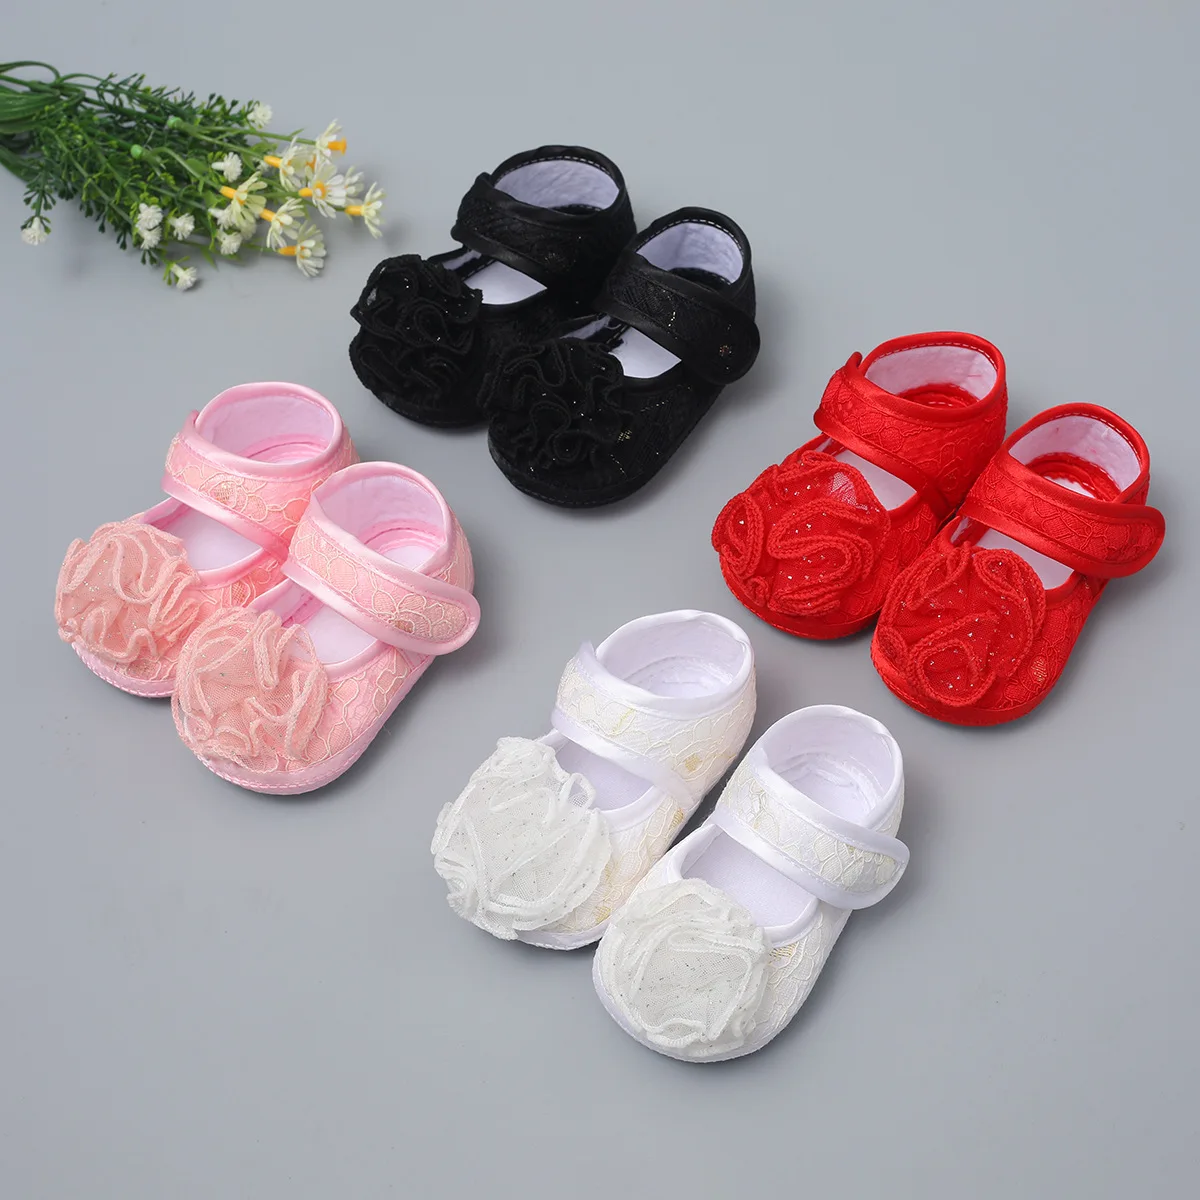 Yellow 11cm Alamana Lovely Flower Pattern Infant Baby Girls Soft Sole Boots Prewalker Toddler Shoes